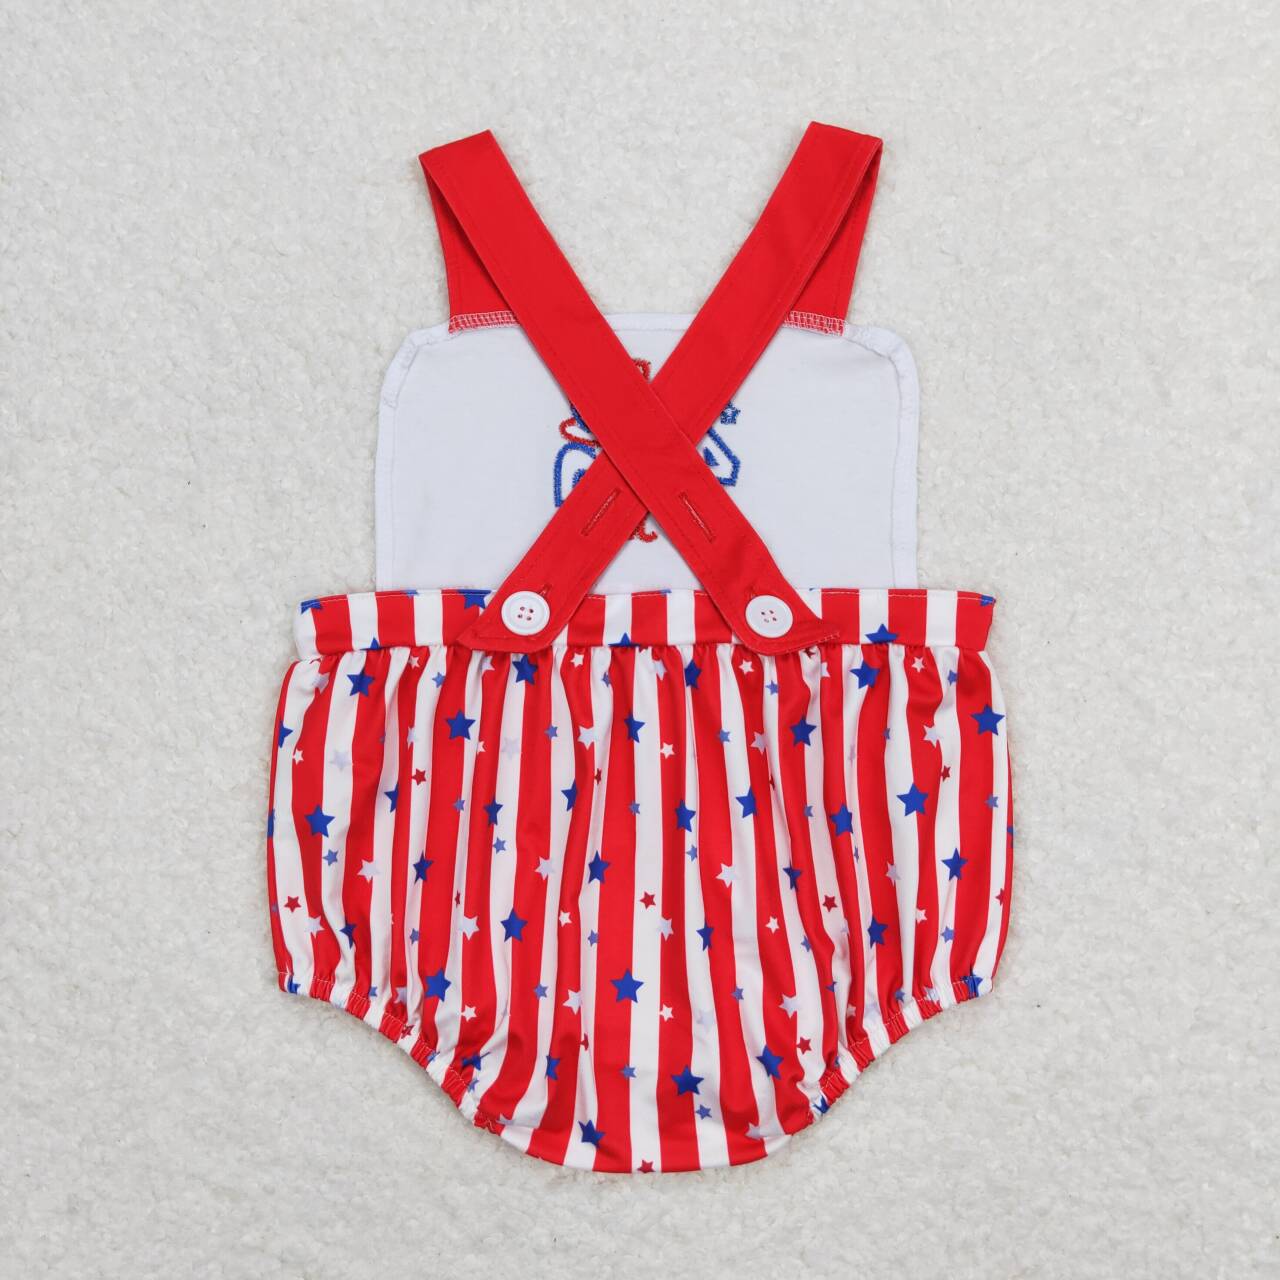 SR0810 4th of july Embroidered letter star hat Red and white striped vest onesie